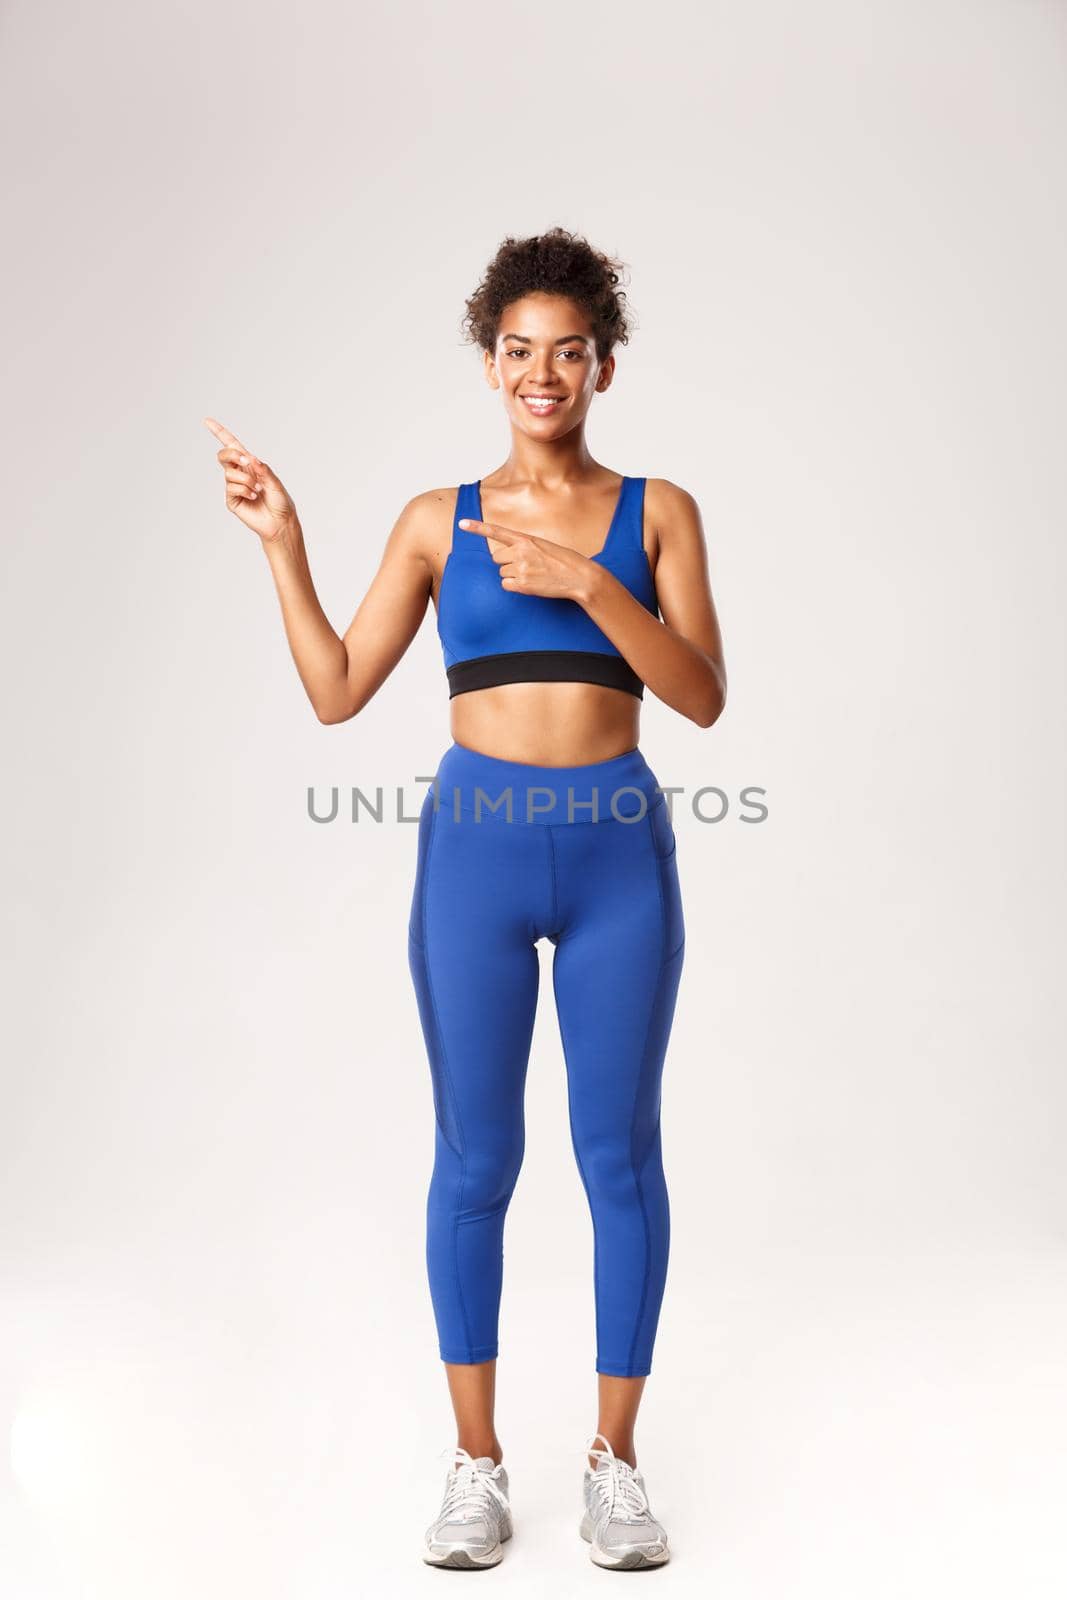 Full length of smiling attractive african-american girl in fitness clothing, pointing fingers left, showing gym logo or product banner, standing over white background.